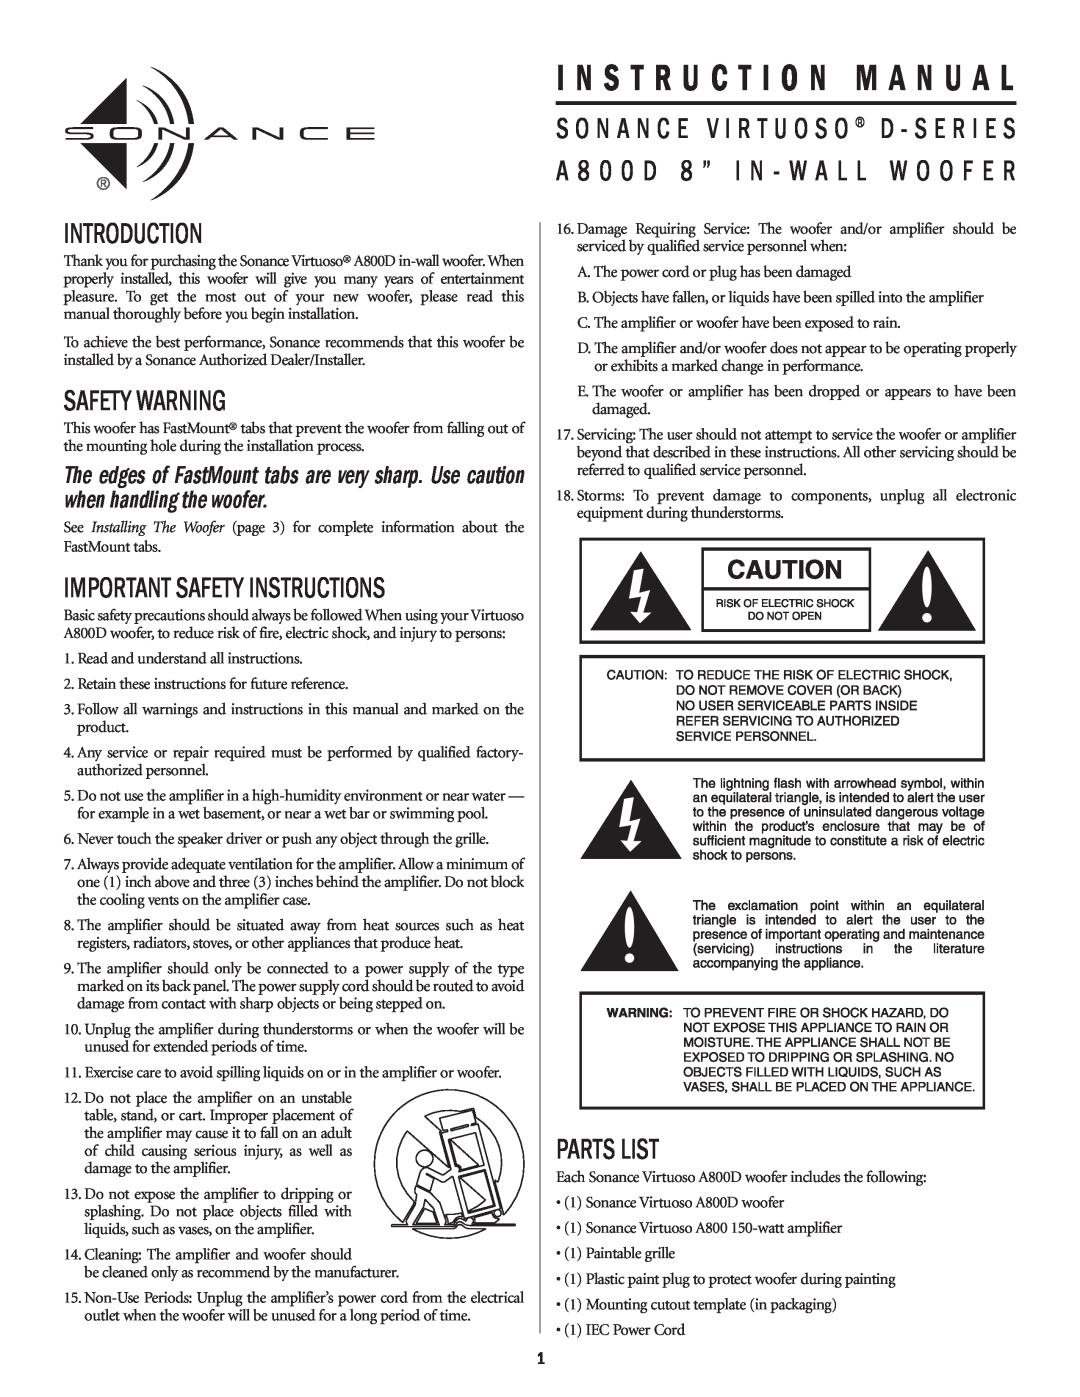 Sonance A800D important safety instructions I N S T R U C T I O N M A N U A L, Introduction, Safety Warning, Parts List 